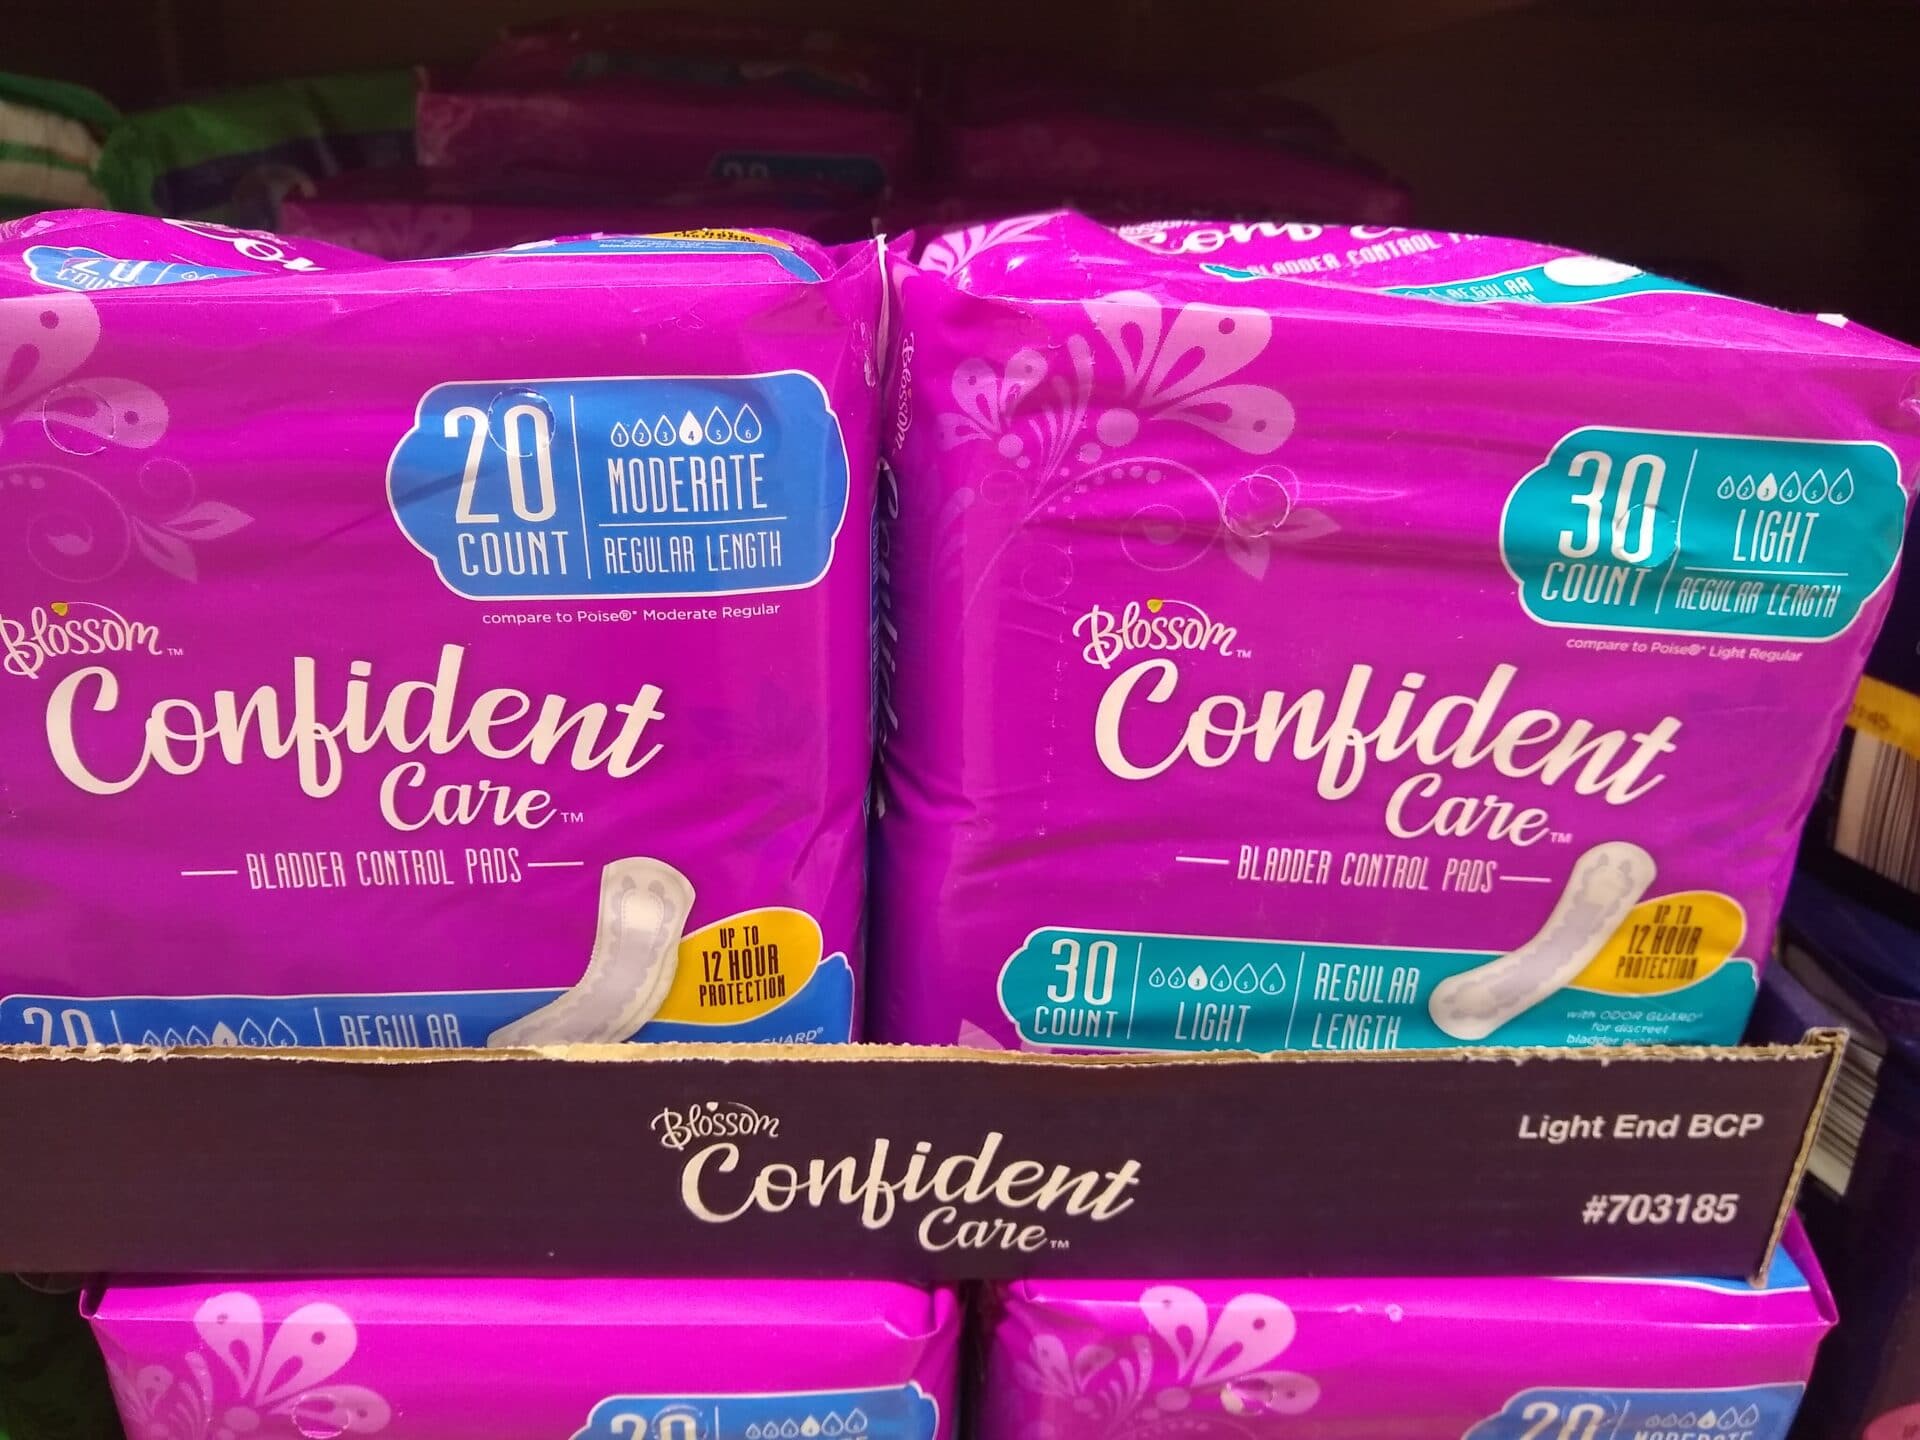 Aldi Blossom Brand Now Includes Generic Depend Underwear and Poise